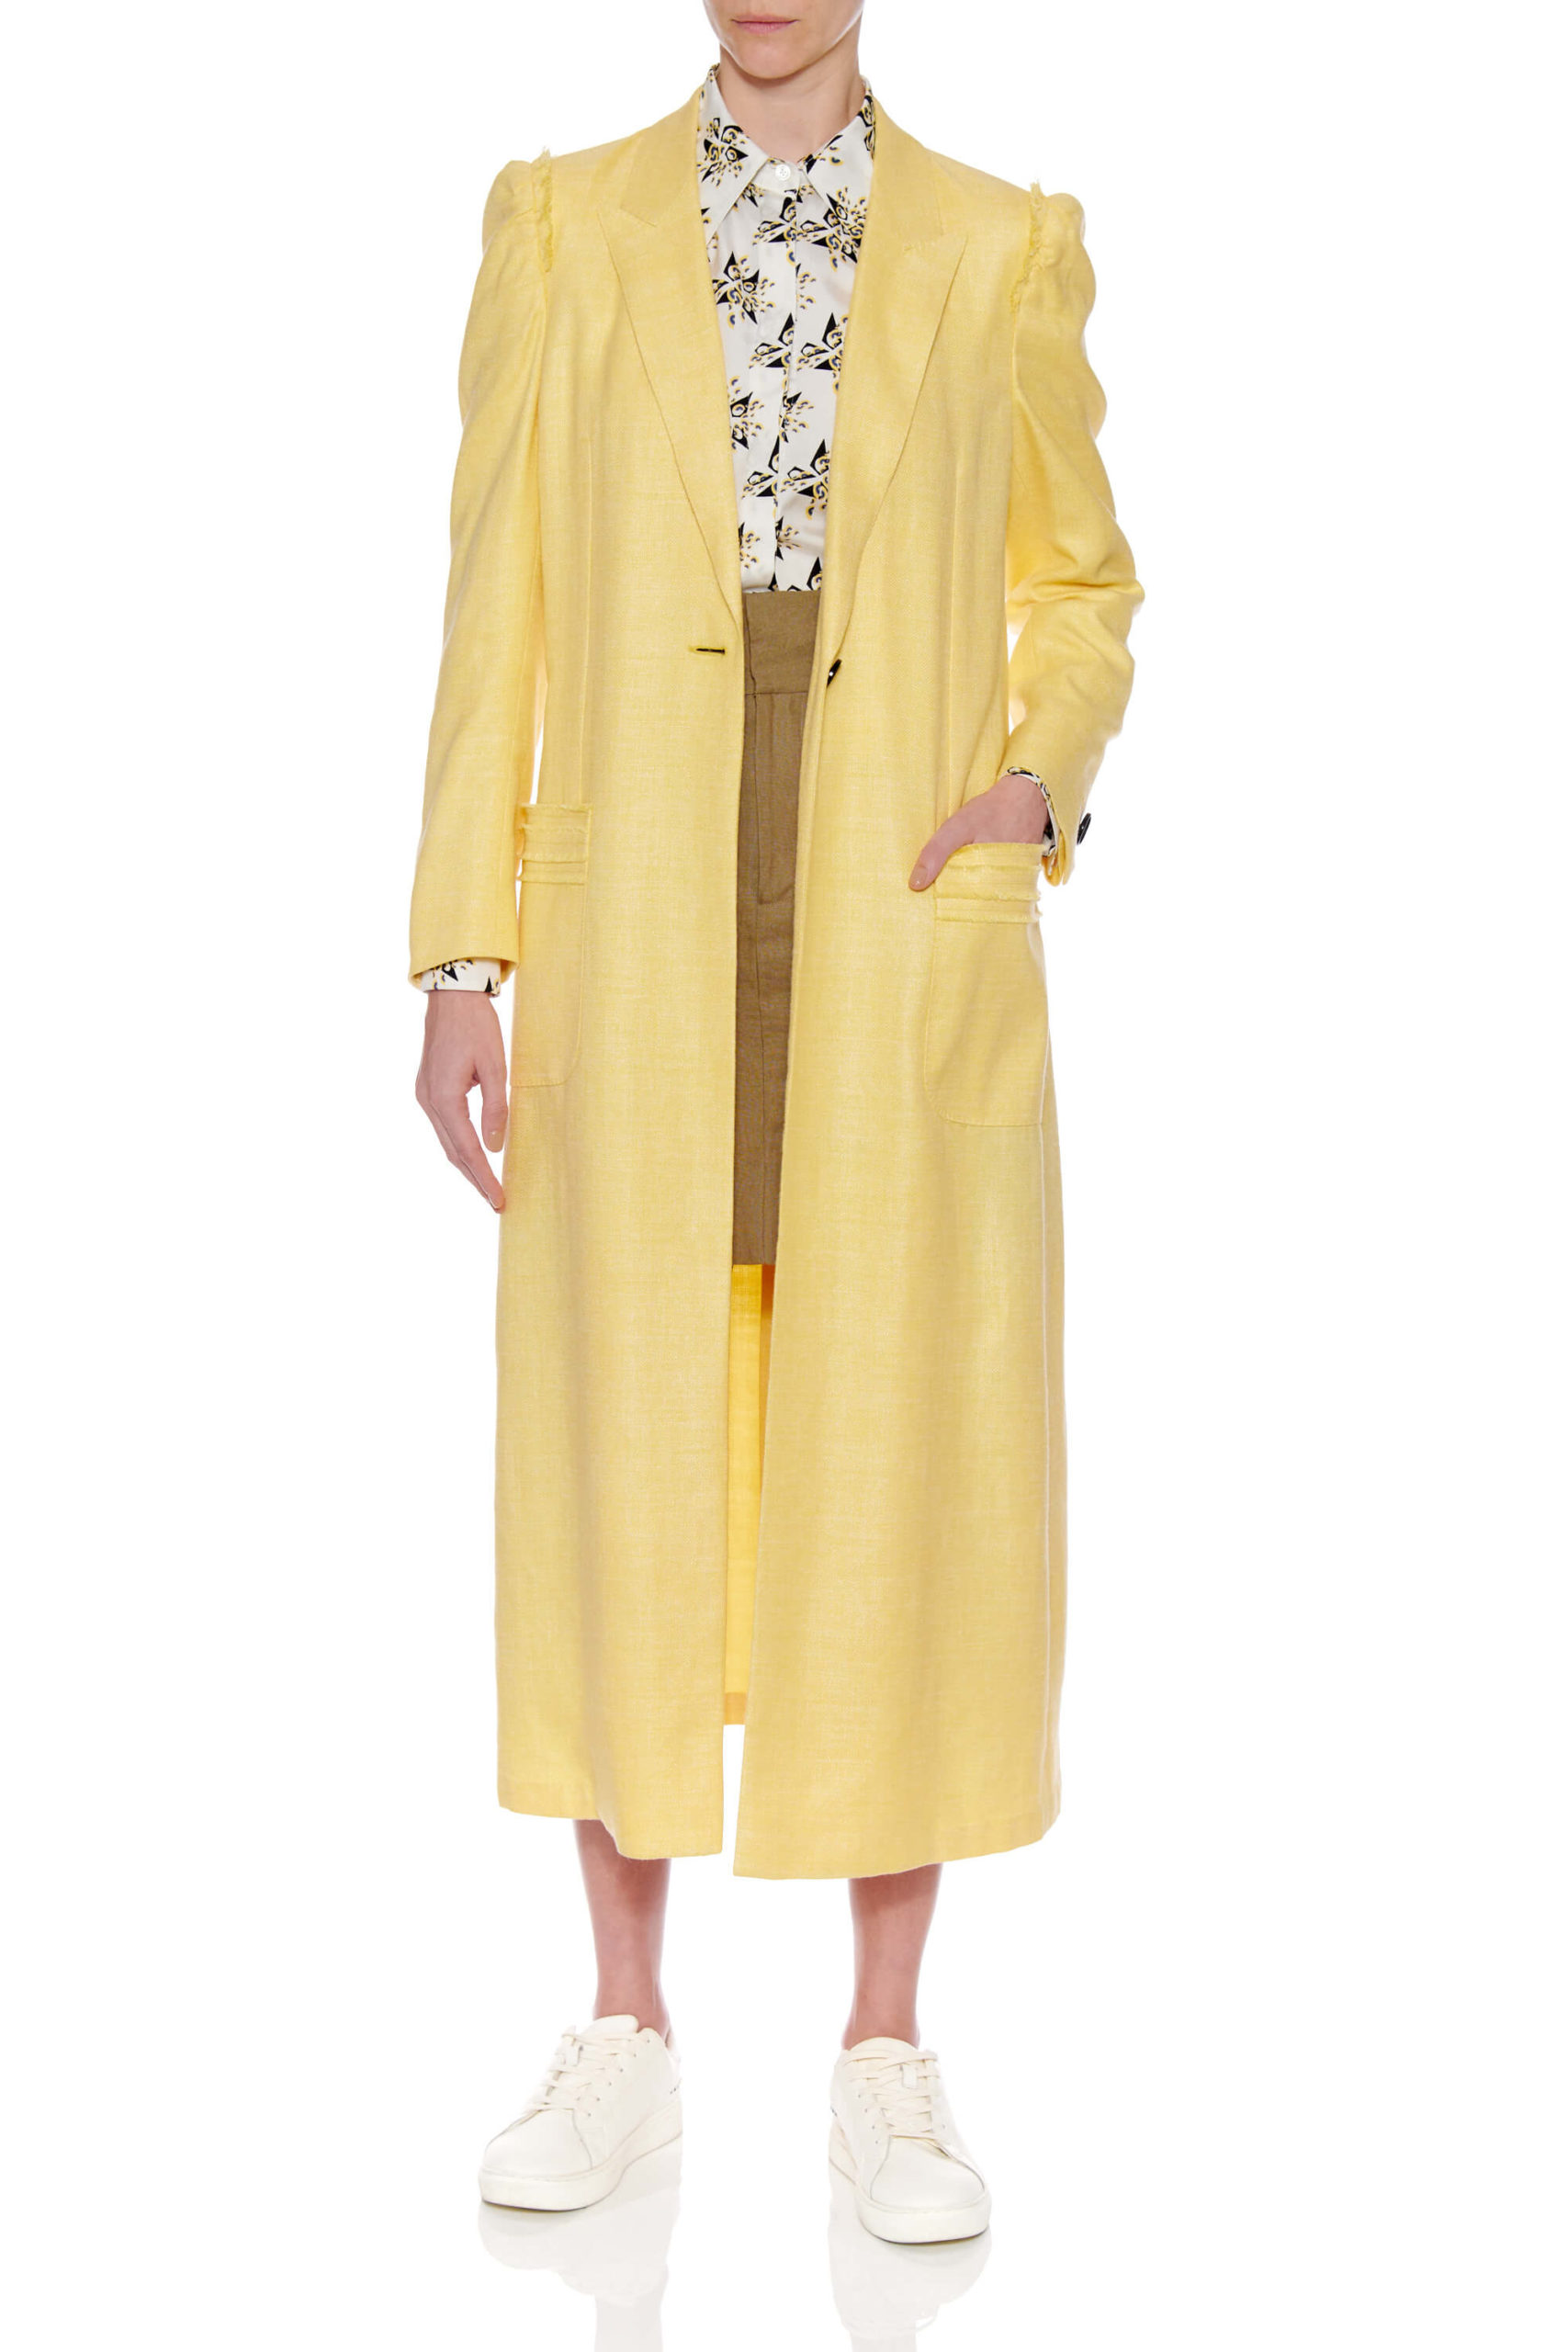 Santander Coat – Classic long coat with notched lapel in yellow